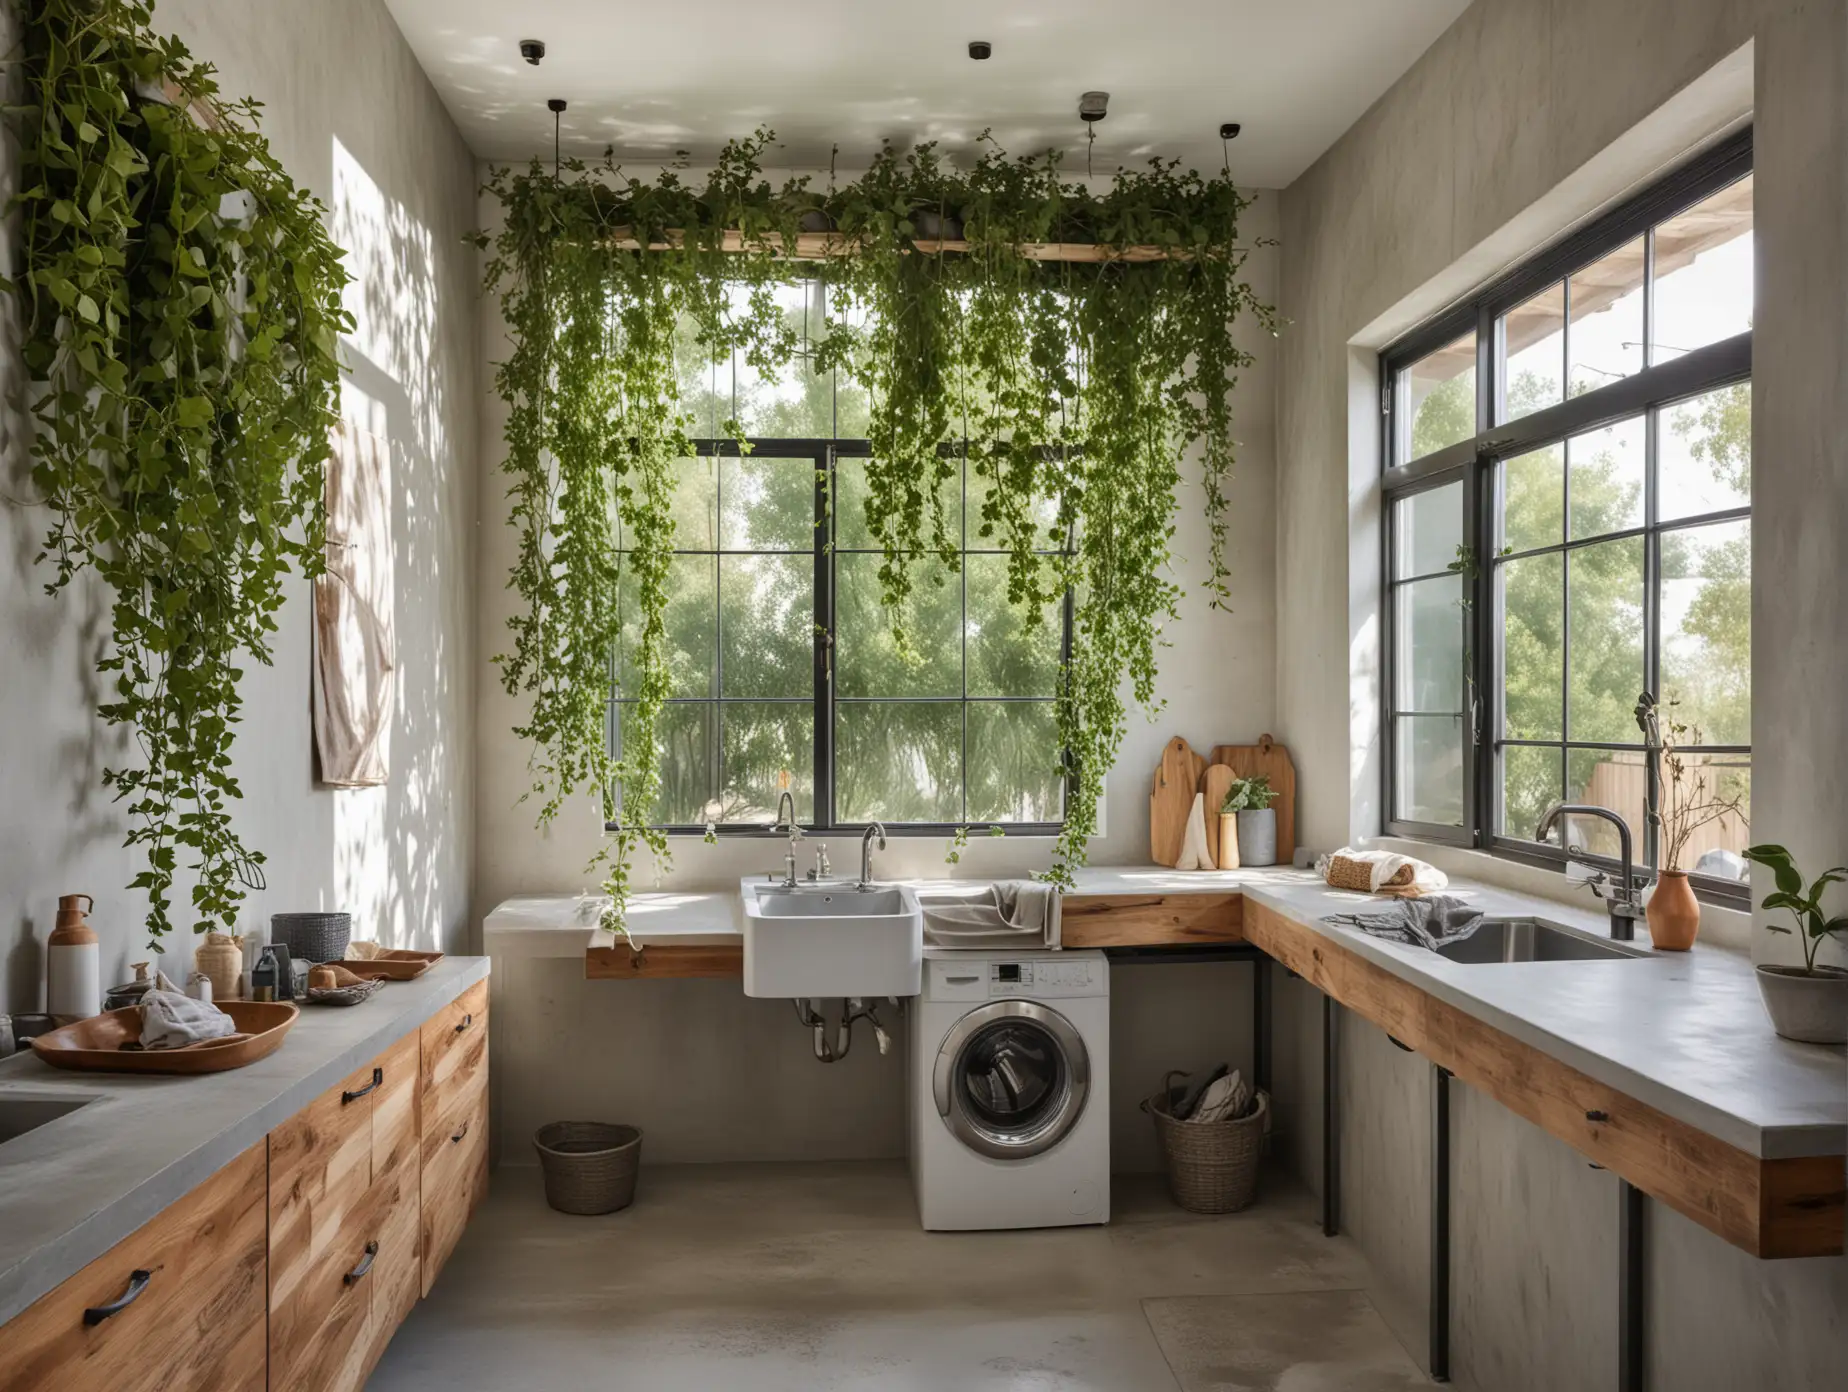 Modern-Laundry-Room-with-Sunlit-Windows-and-Climbing-Vines